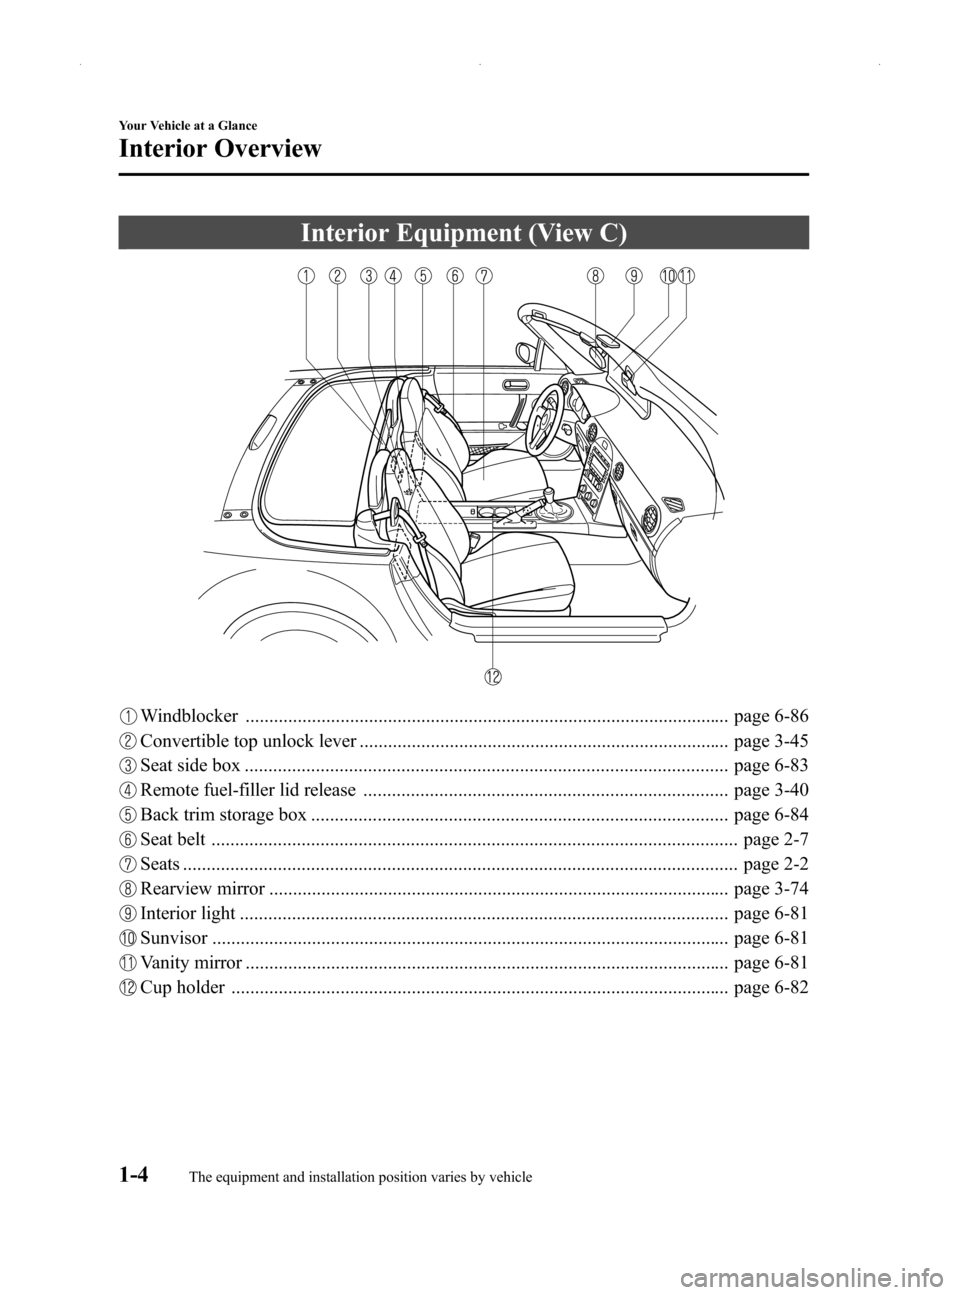 MAZDA MODEL MX-5 2014  Owners Manual (in English) Black plate (10,1)
Interior Equipment (View C)
Windblocker ...................................................................................................... page 6-86
Convertible top unlock lever